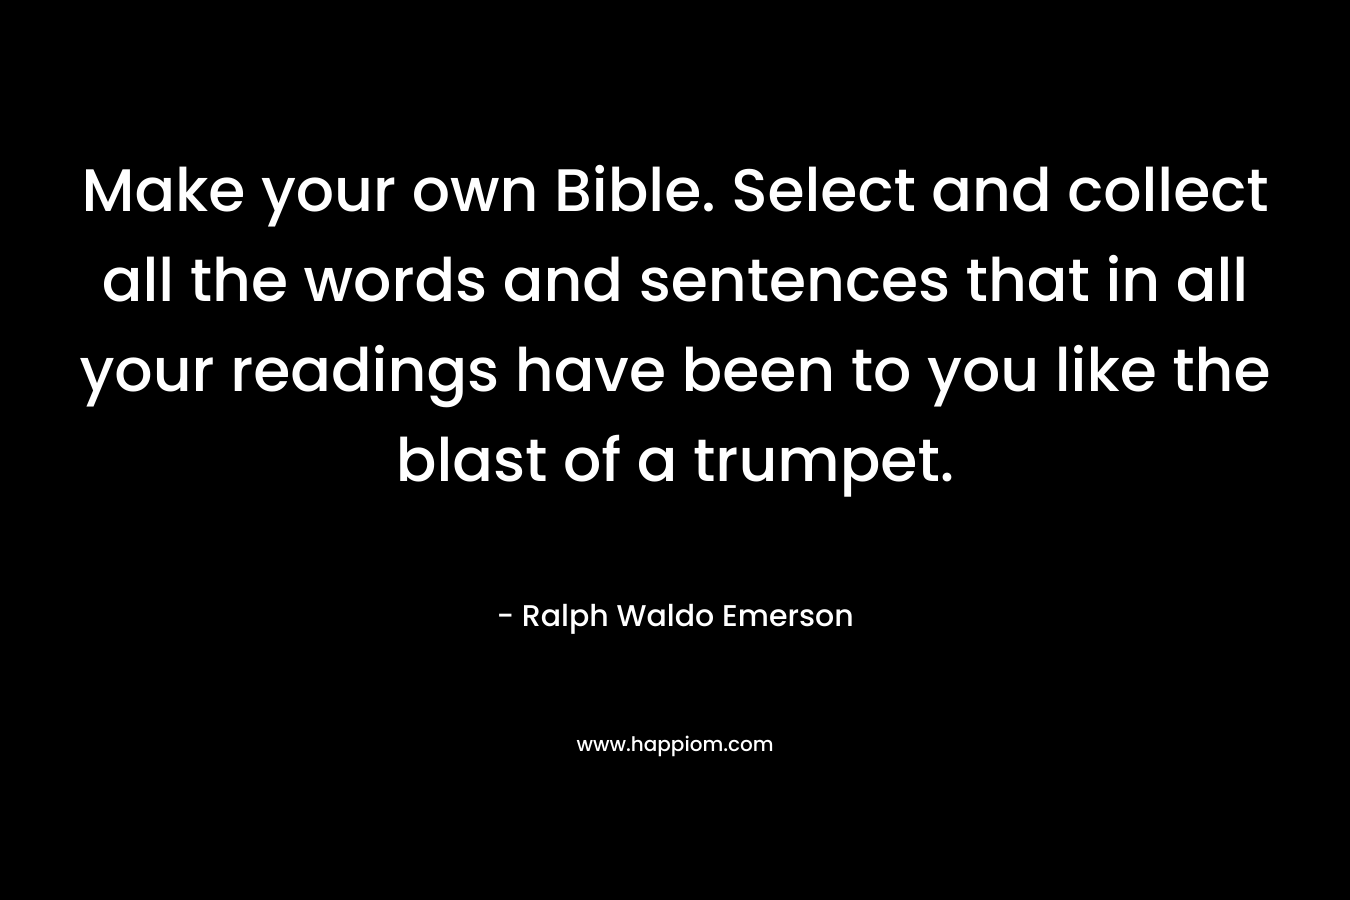 Make your own Bible. Select and collect all the words and sentences that in all your readings have been to you like the blast of a trumpet.